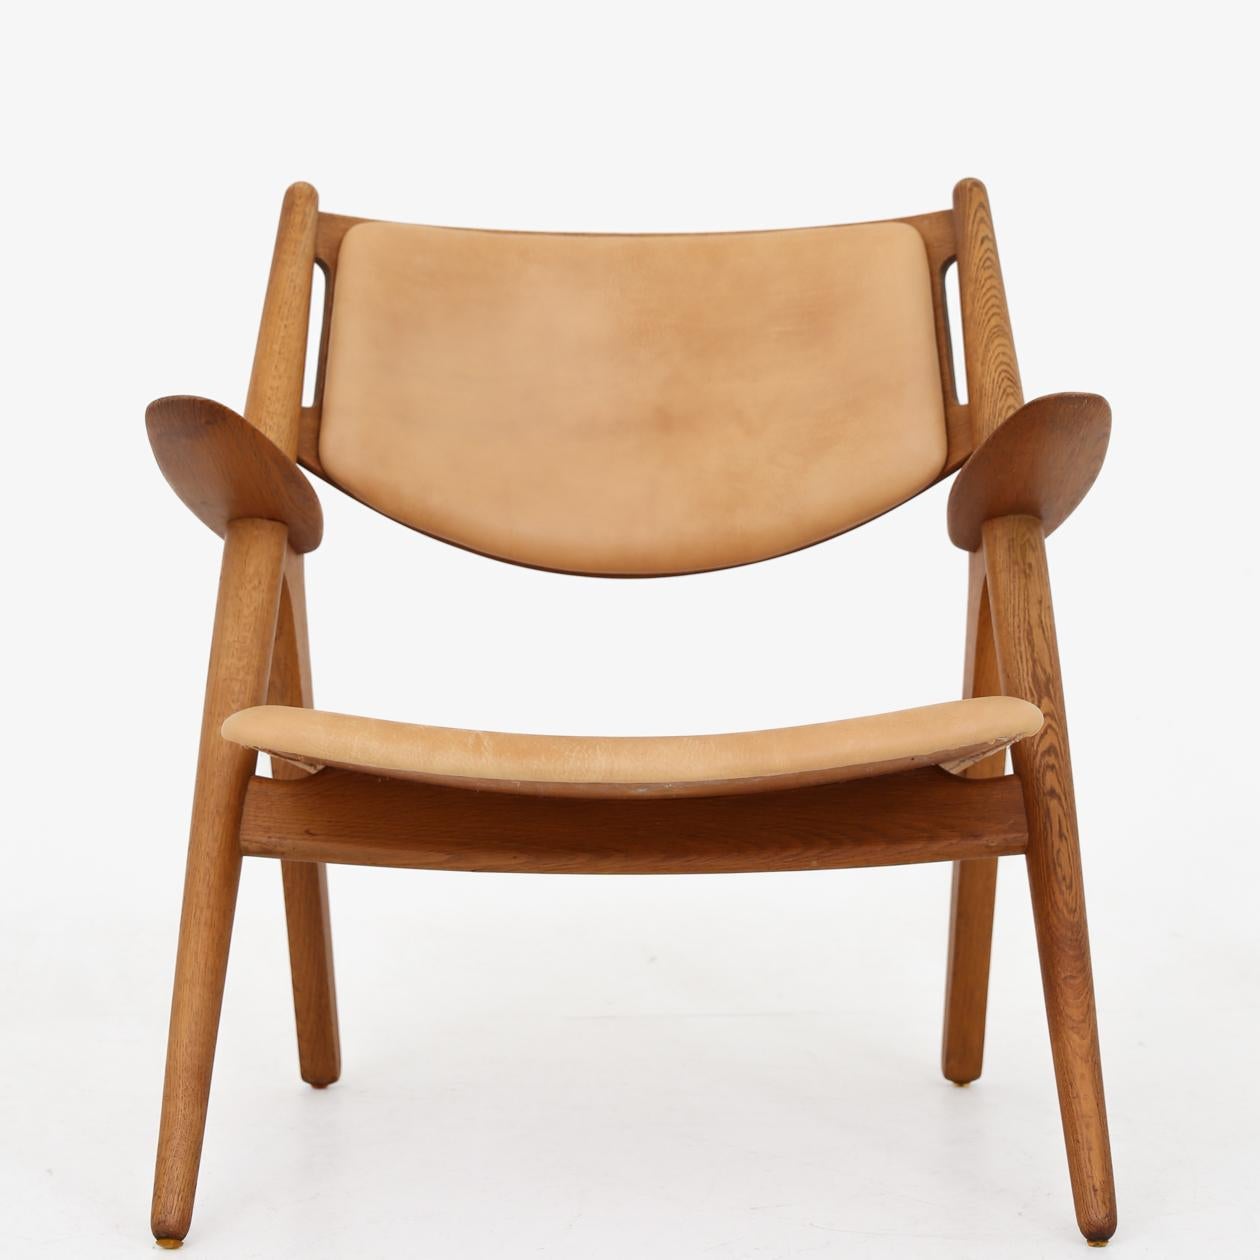 CH 28 - pair of 'Sawbuck' armchairs in patinated oak and natural leather. Designed in 1952. Hans J. Wegner / Carl Hansen.